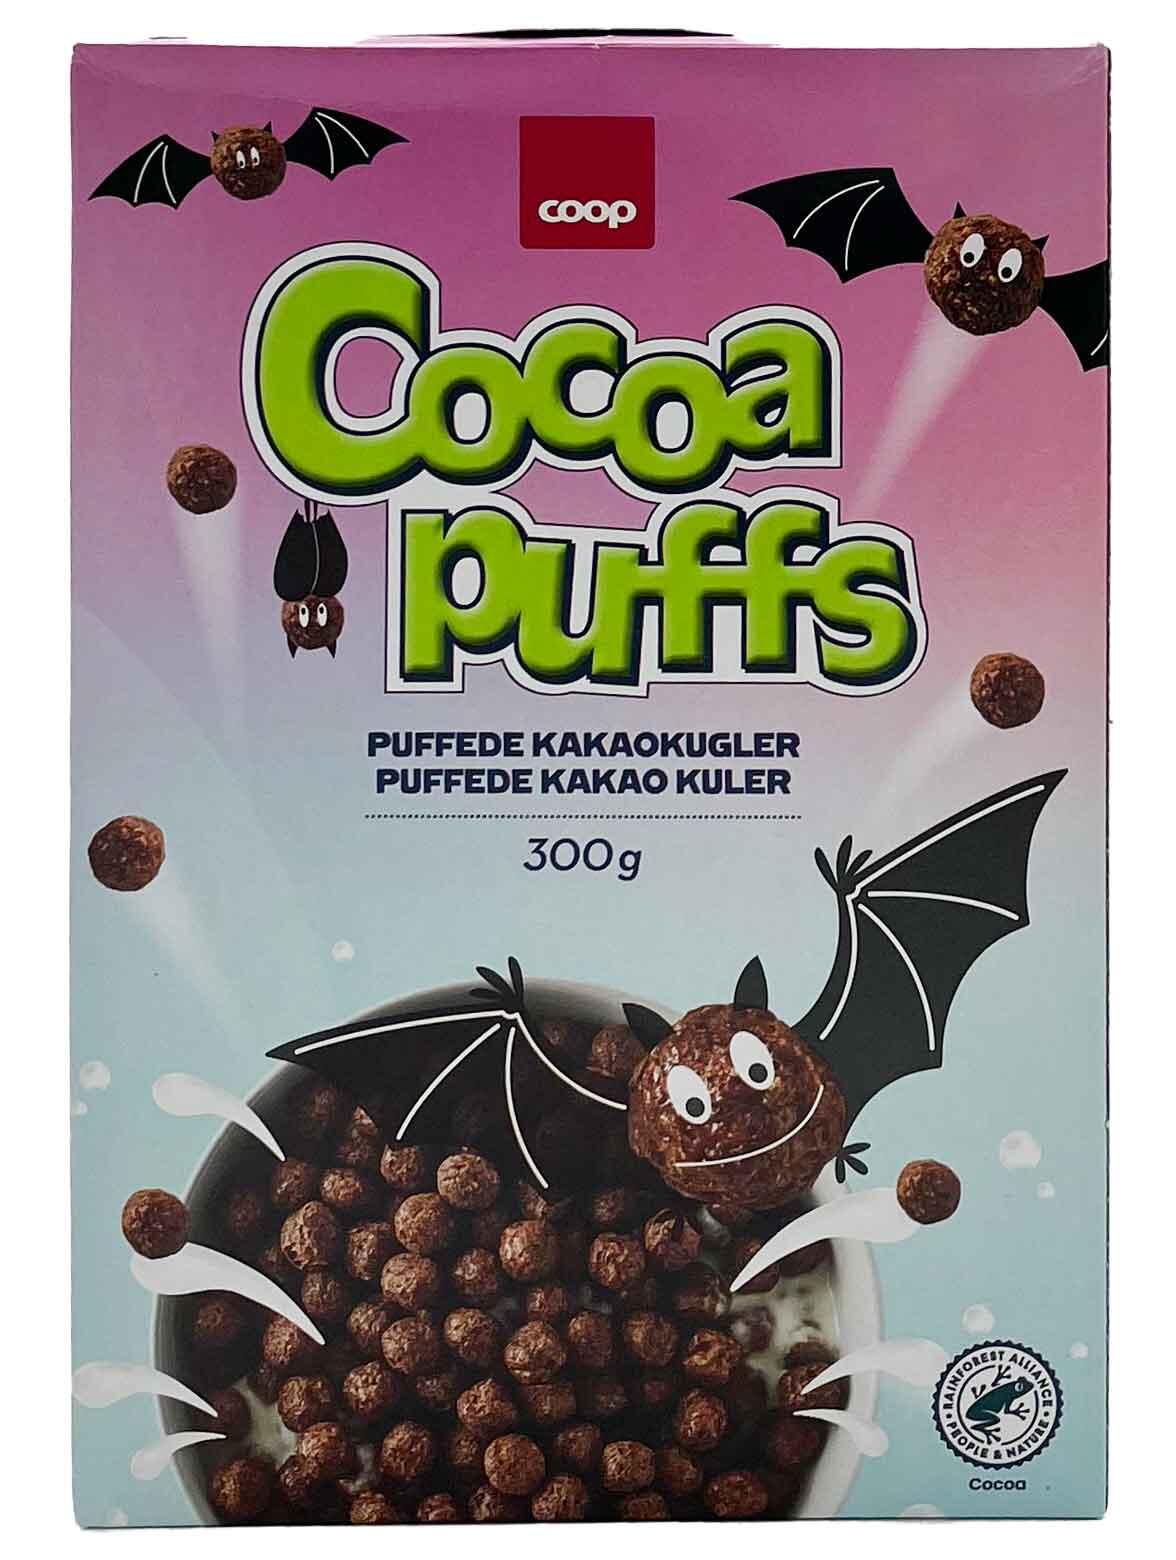 Cocoa Puffs COOP